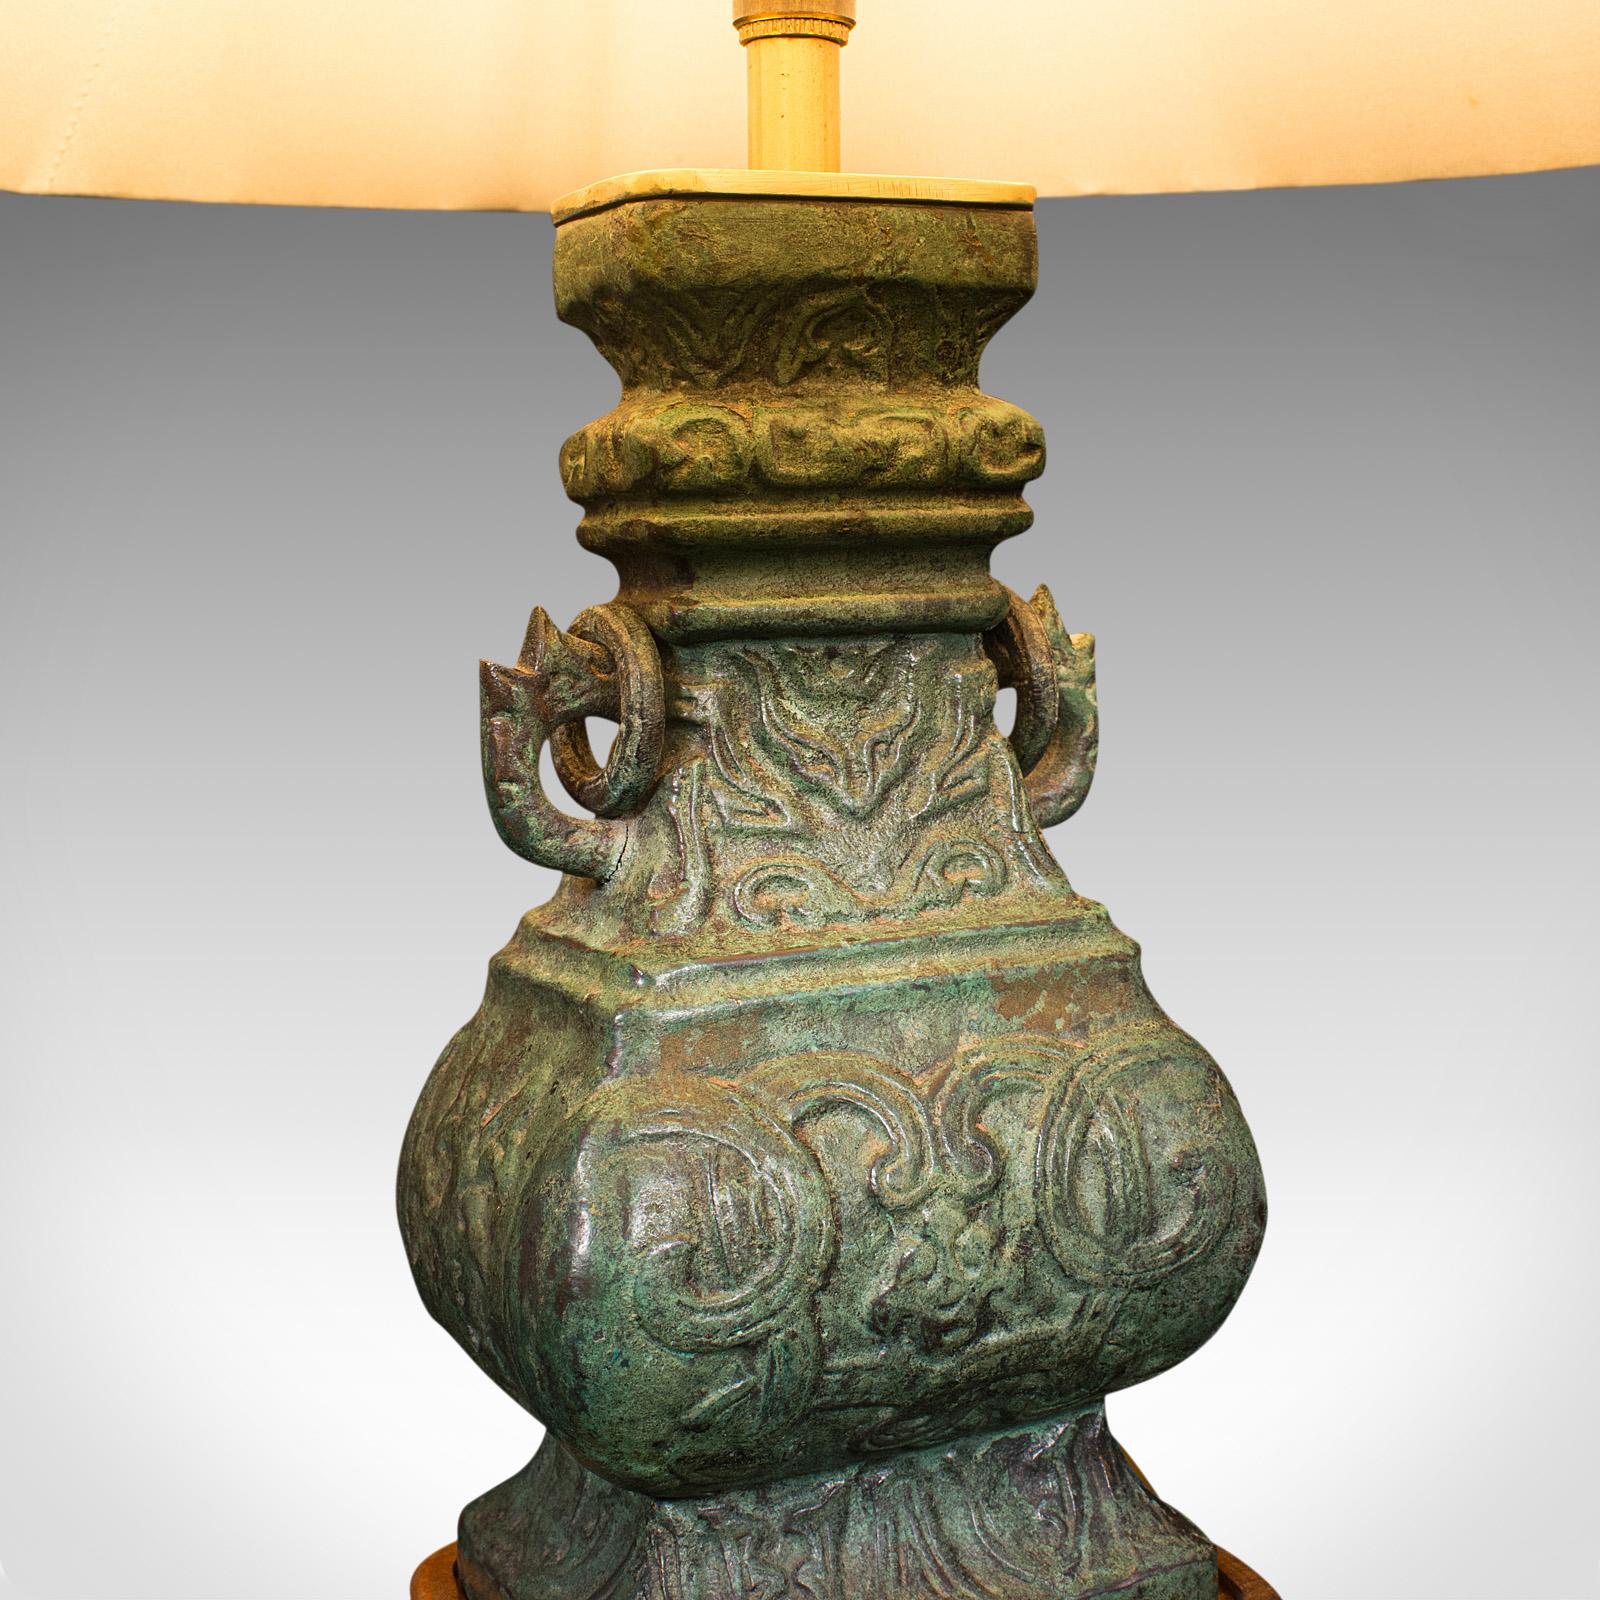 Vintage Decorative Table Lamp, Chinese, Bronze, Accent Light, Mid Century, 1960 3